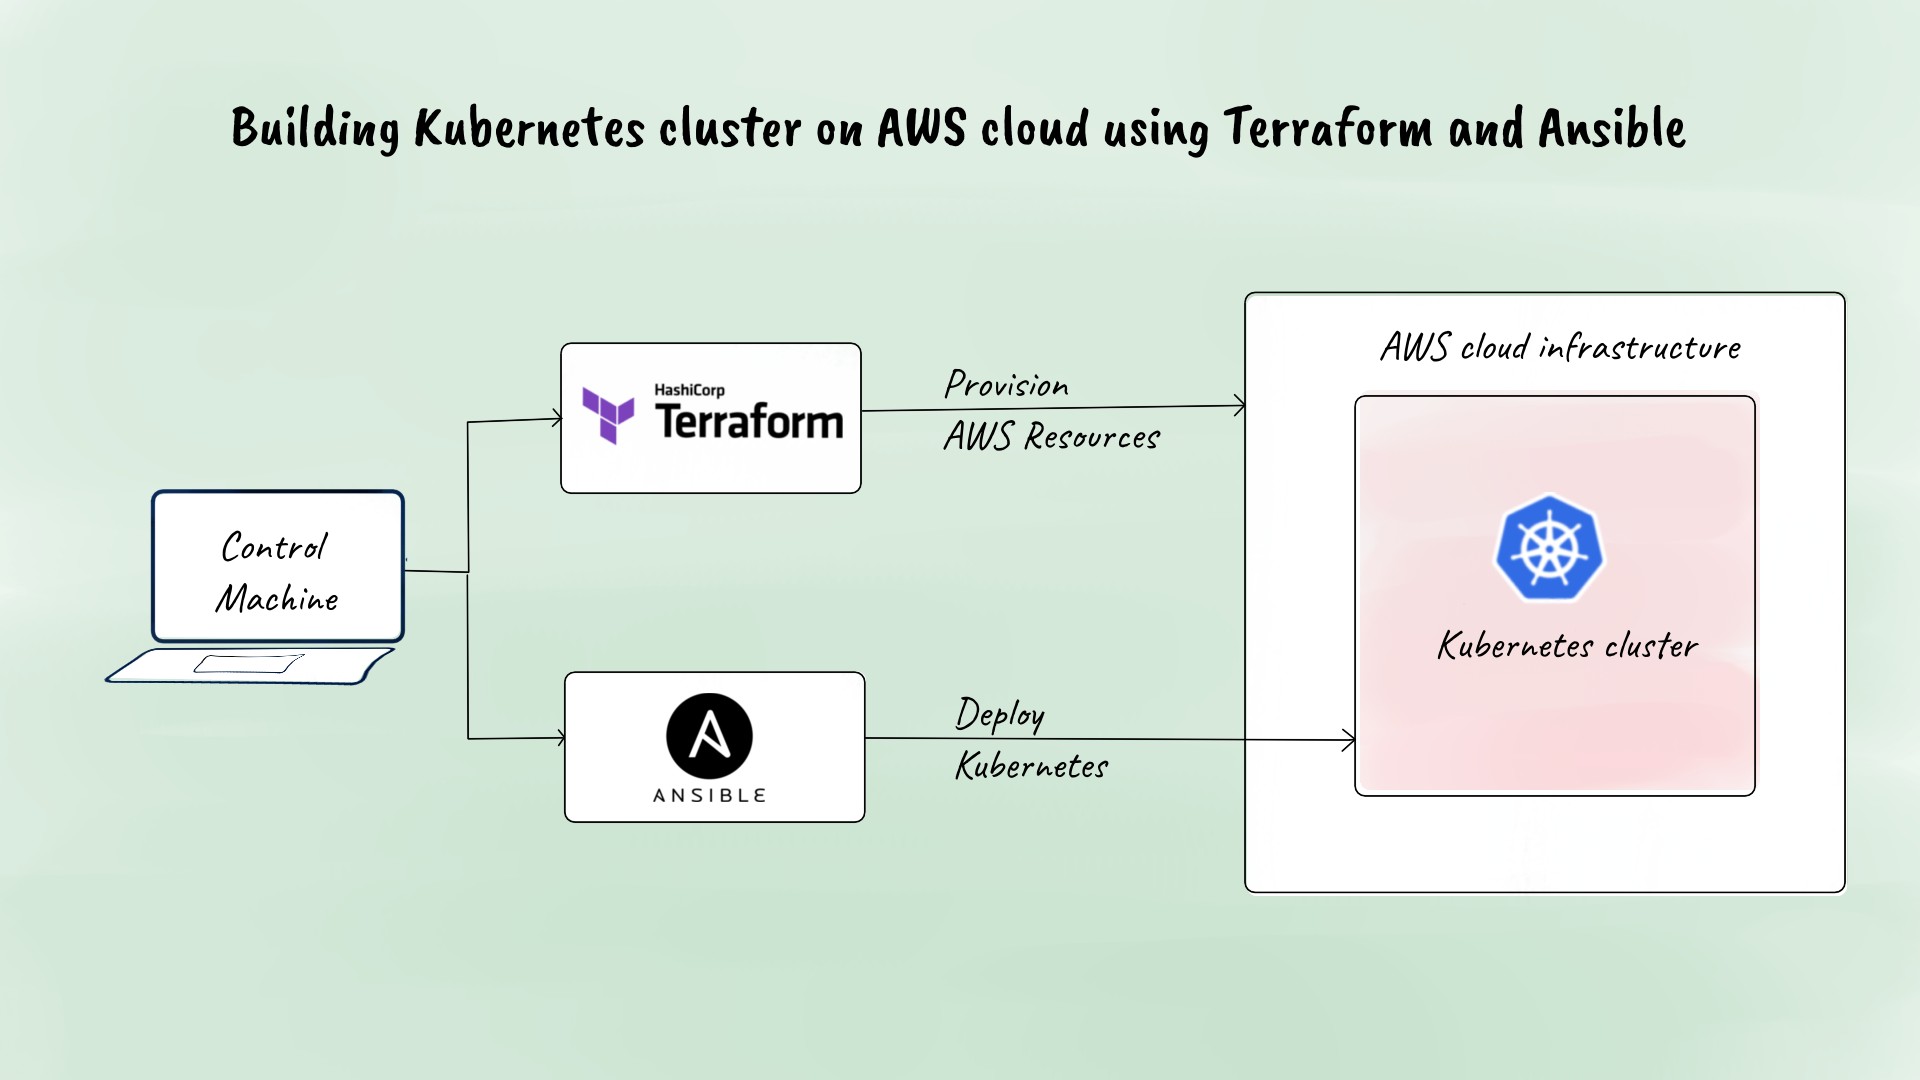 Flow diagram of building Kubernetes cluster on AWS cloud using Terraform and Ansible.